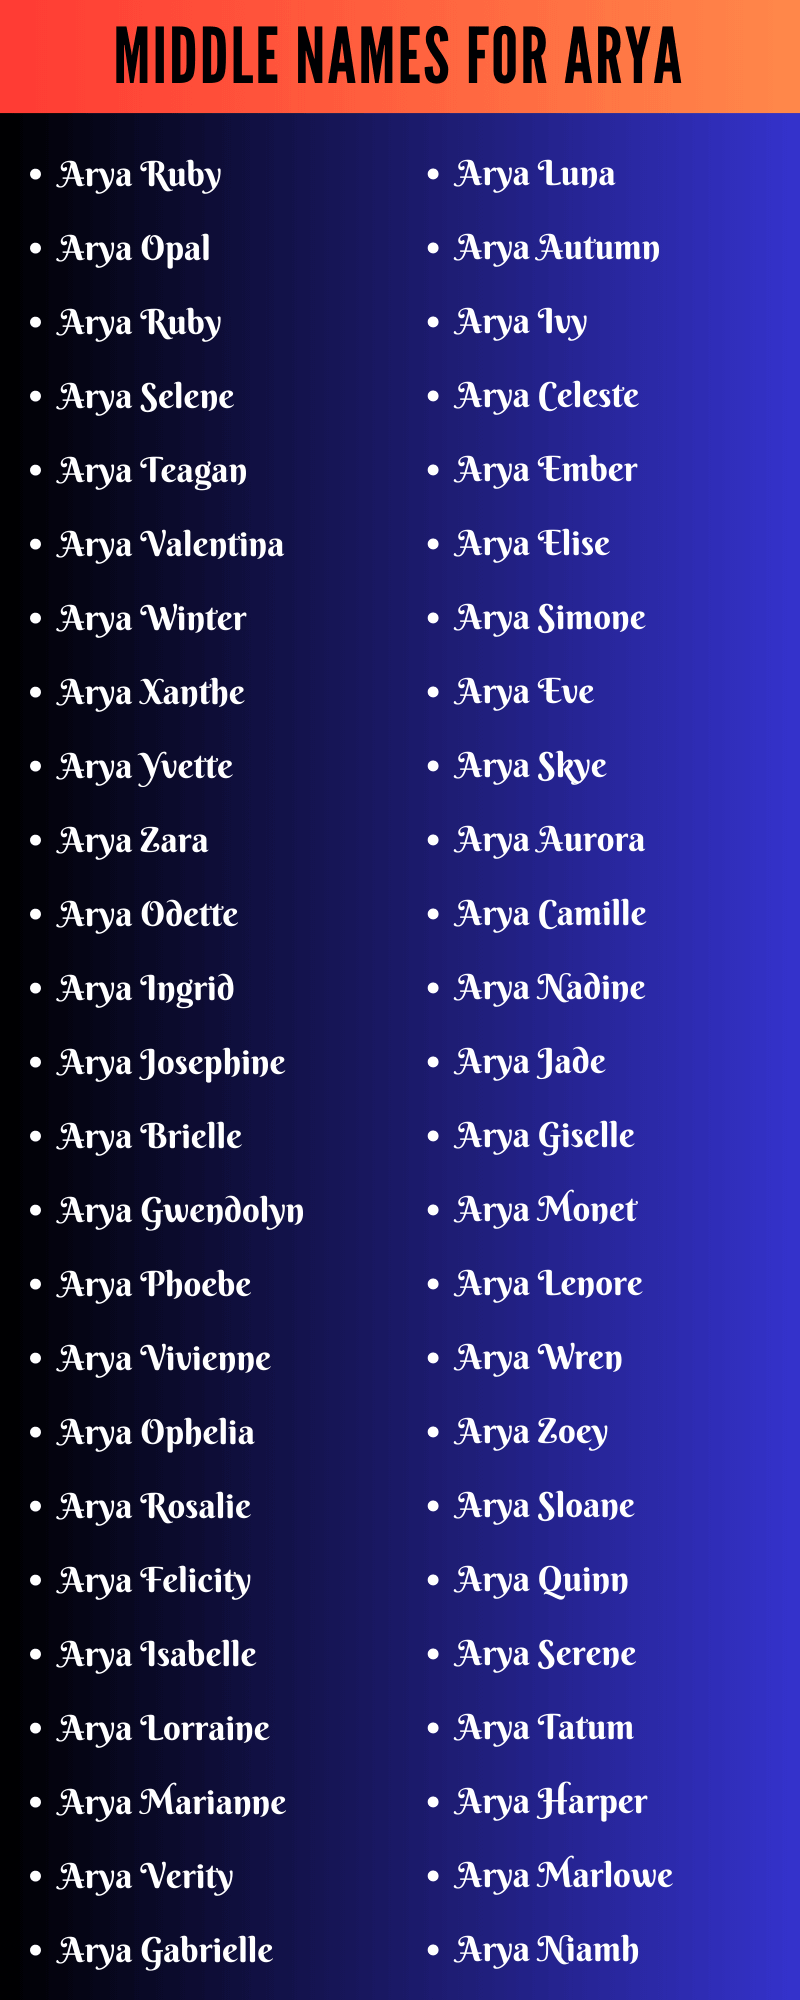 Middle Names For Arya